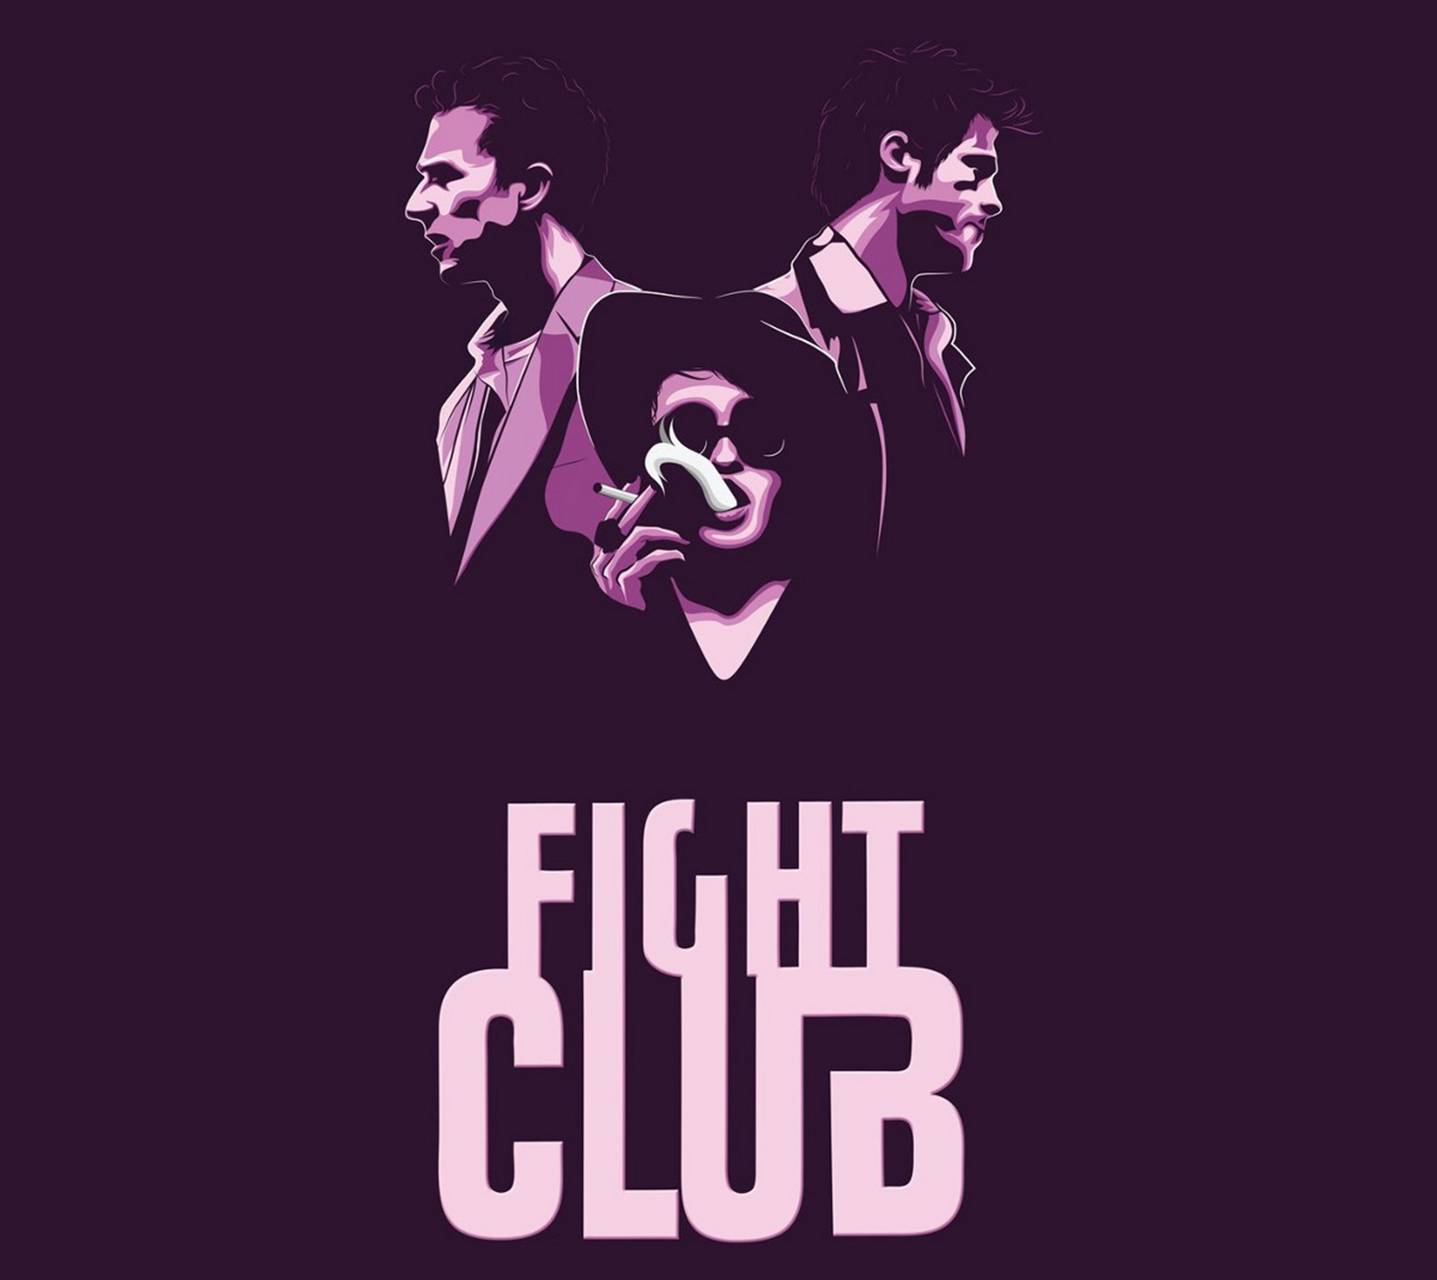 Download Free Fight Club Wallpaper For Your Mobile Phone